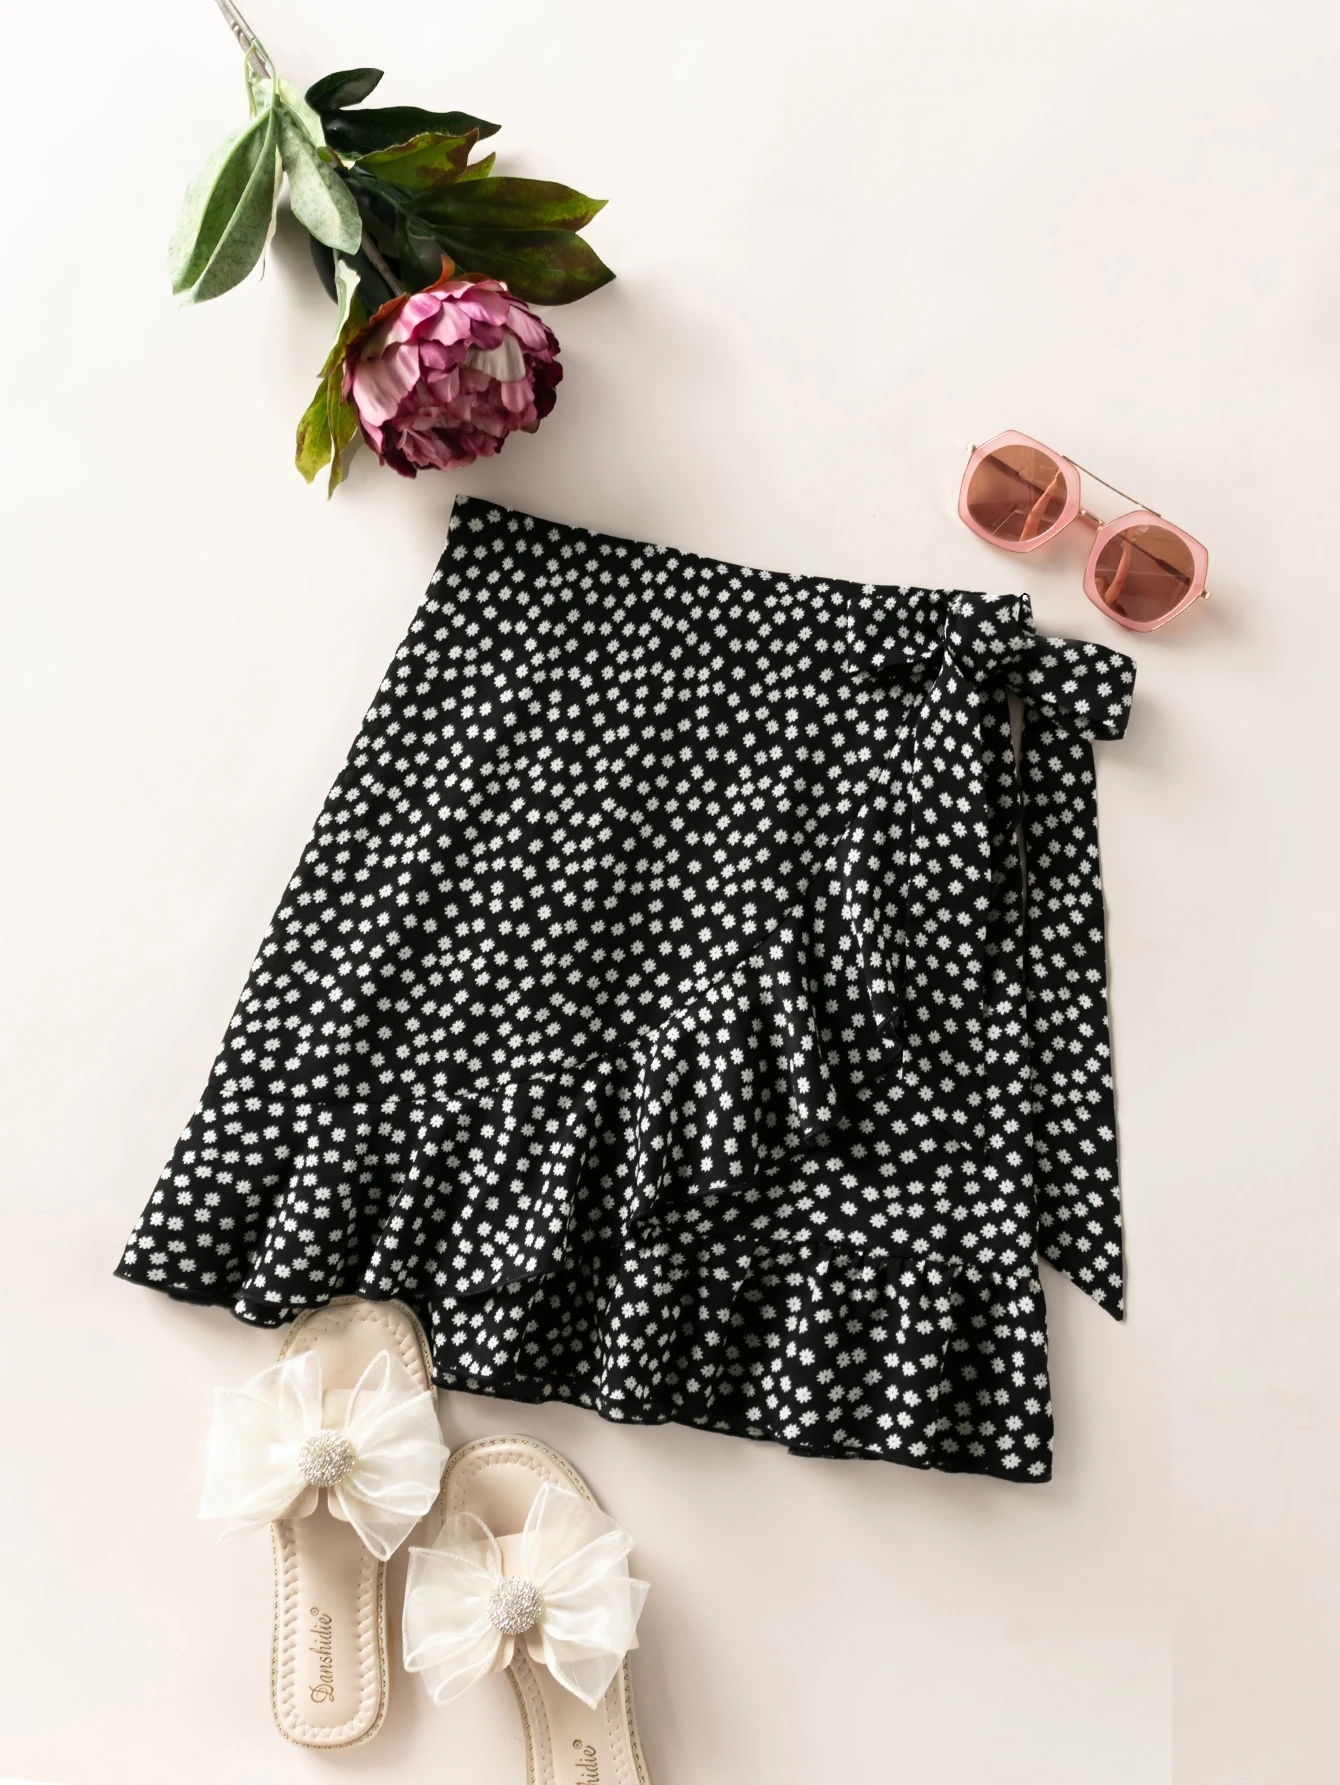 The new trend for 2021 is A floral print holiday skirt with A-line skirt with bow and irregular floral skirt for women with elas sweet women s crossbody bag with bow and floral print design